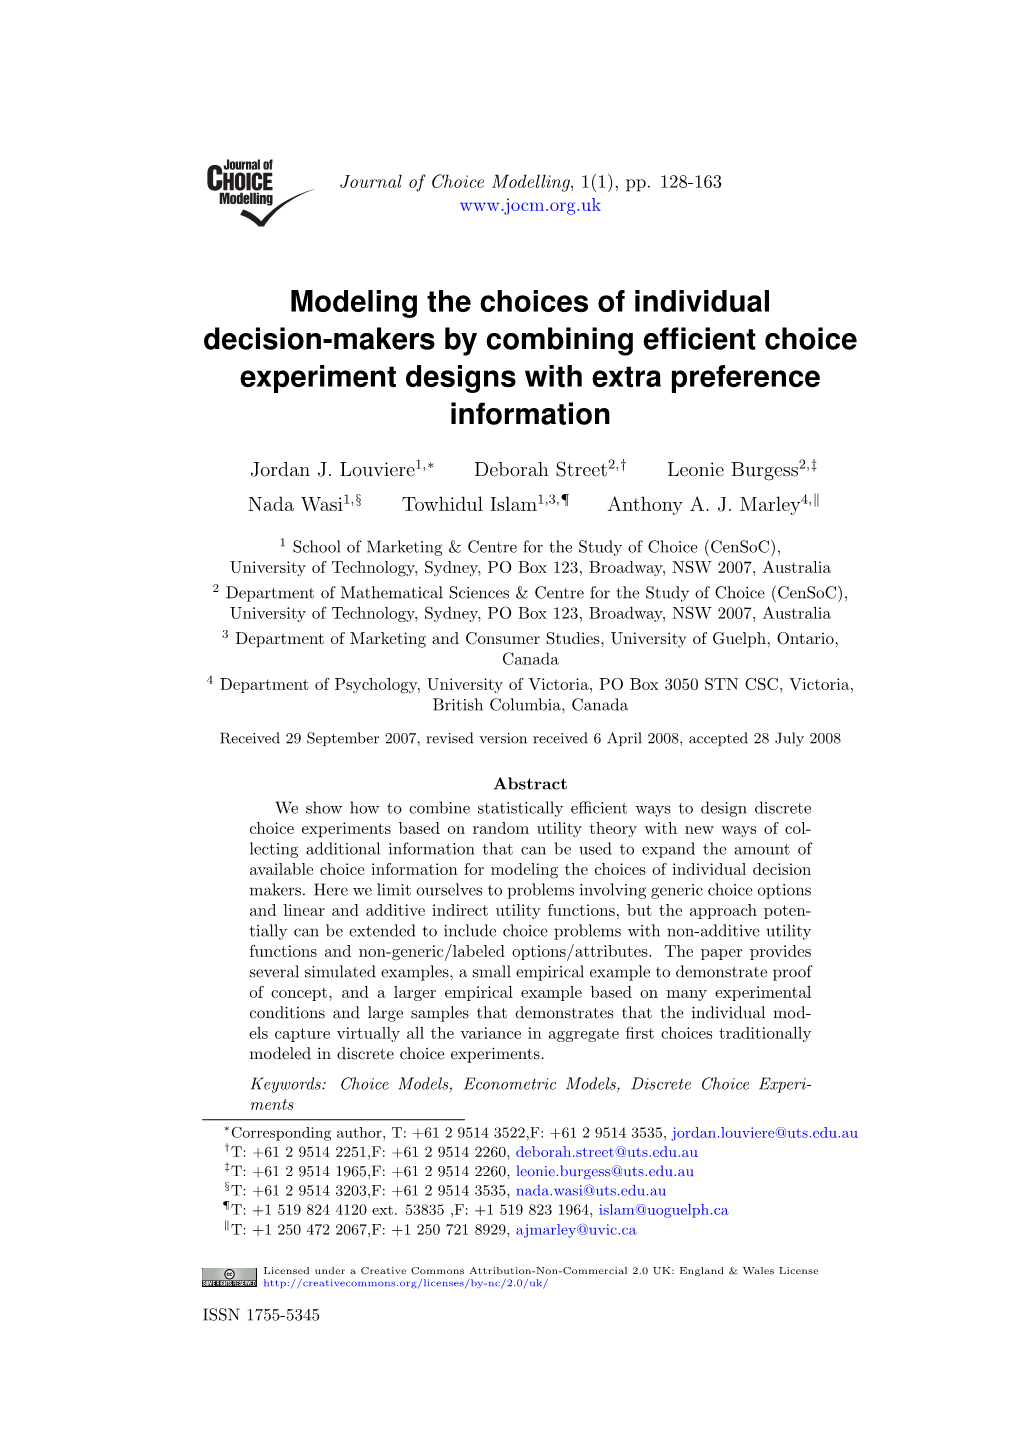 Modeling the Choices of Individual Decision-Makers by Combining Efﬁcient Choice Experiment Designs with Extra Preference Information